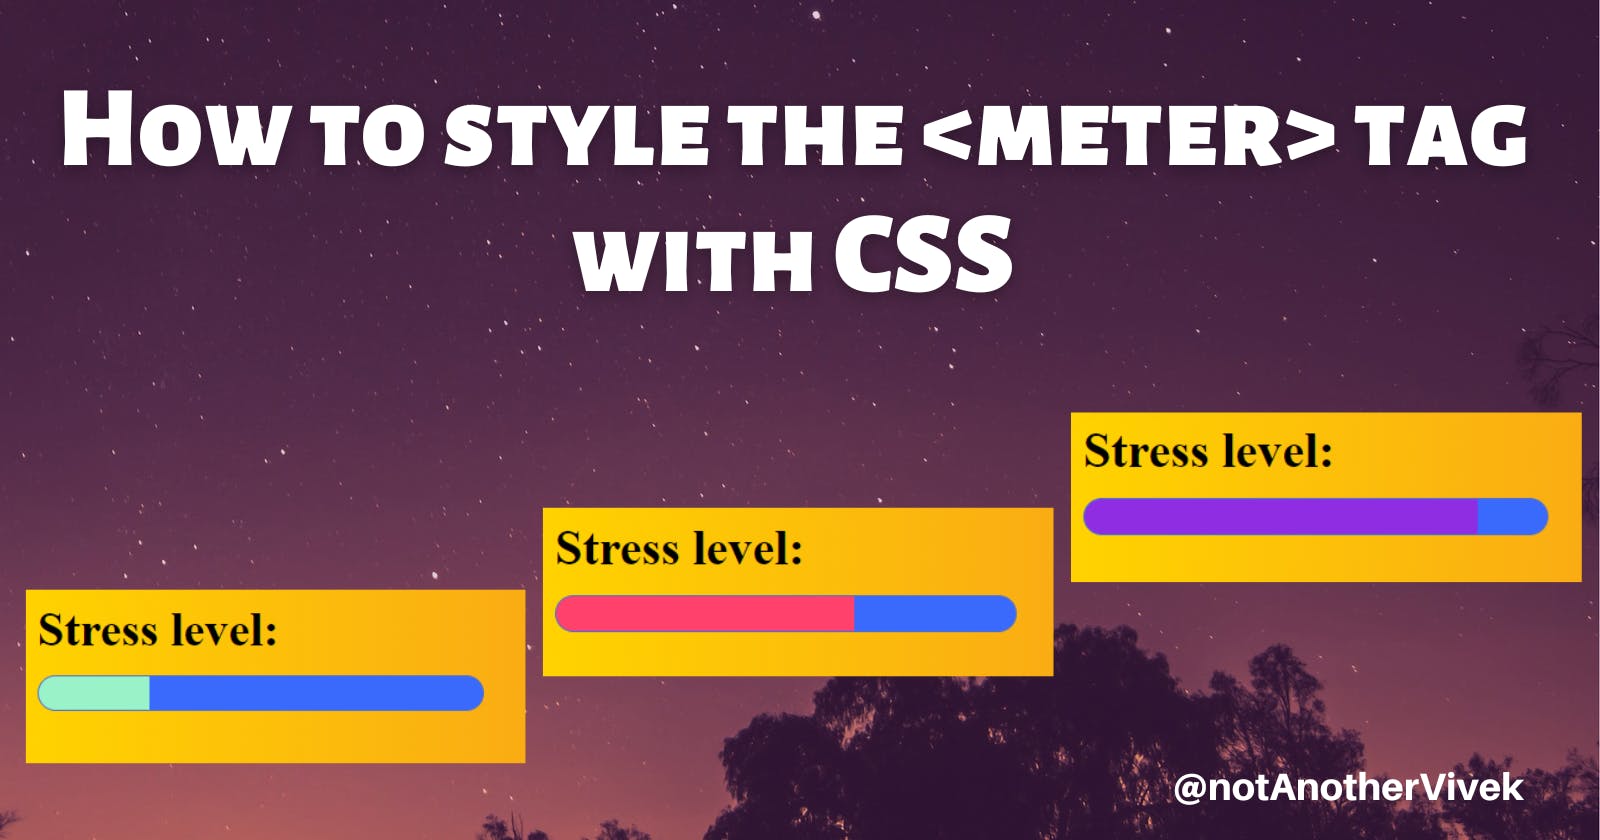 How to change the background colors of the <meter> tag using CSS